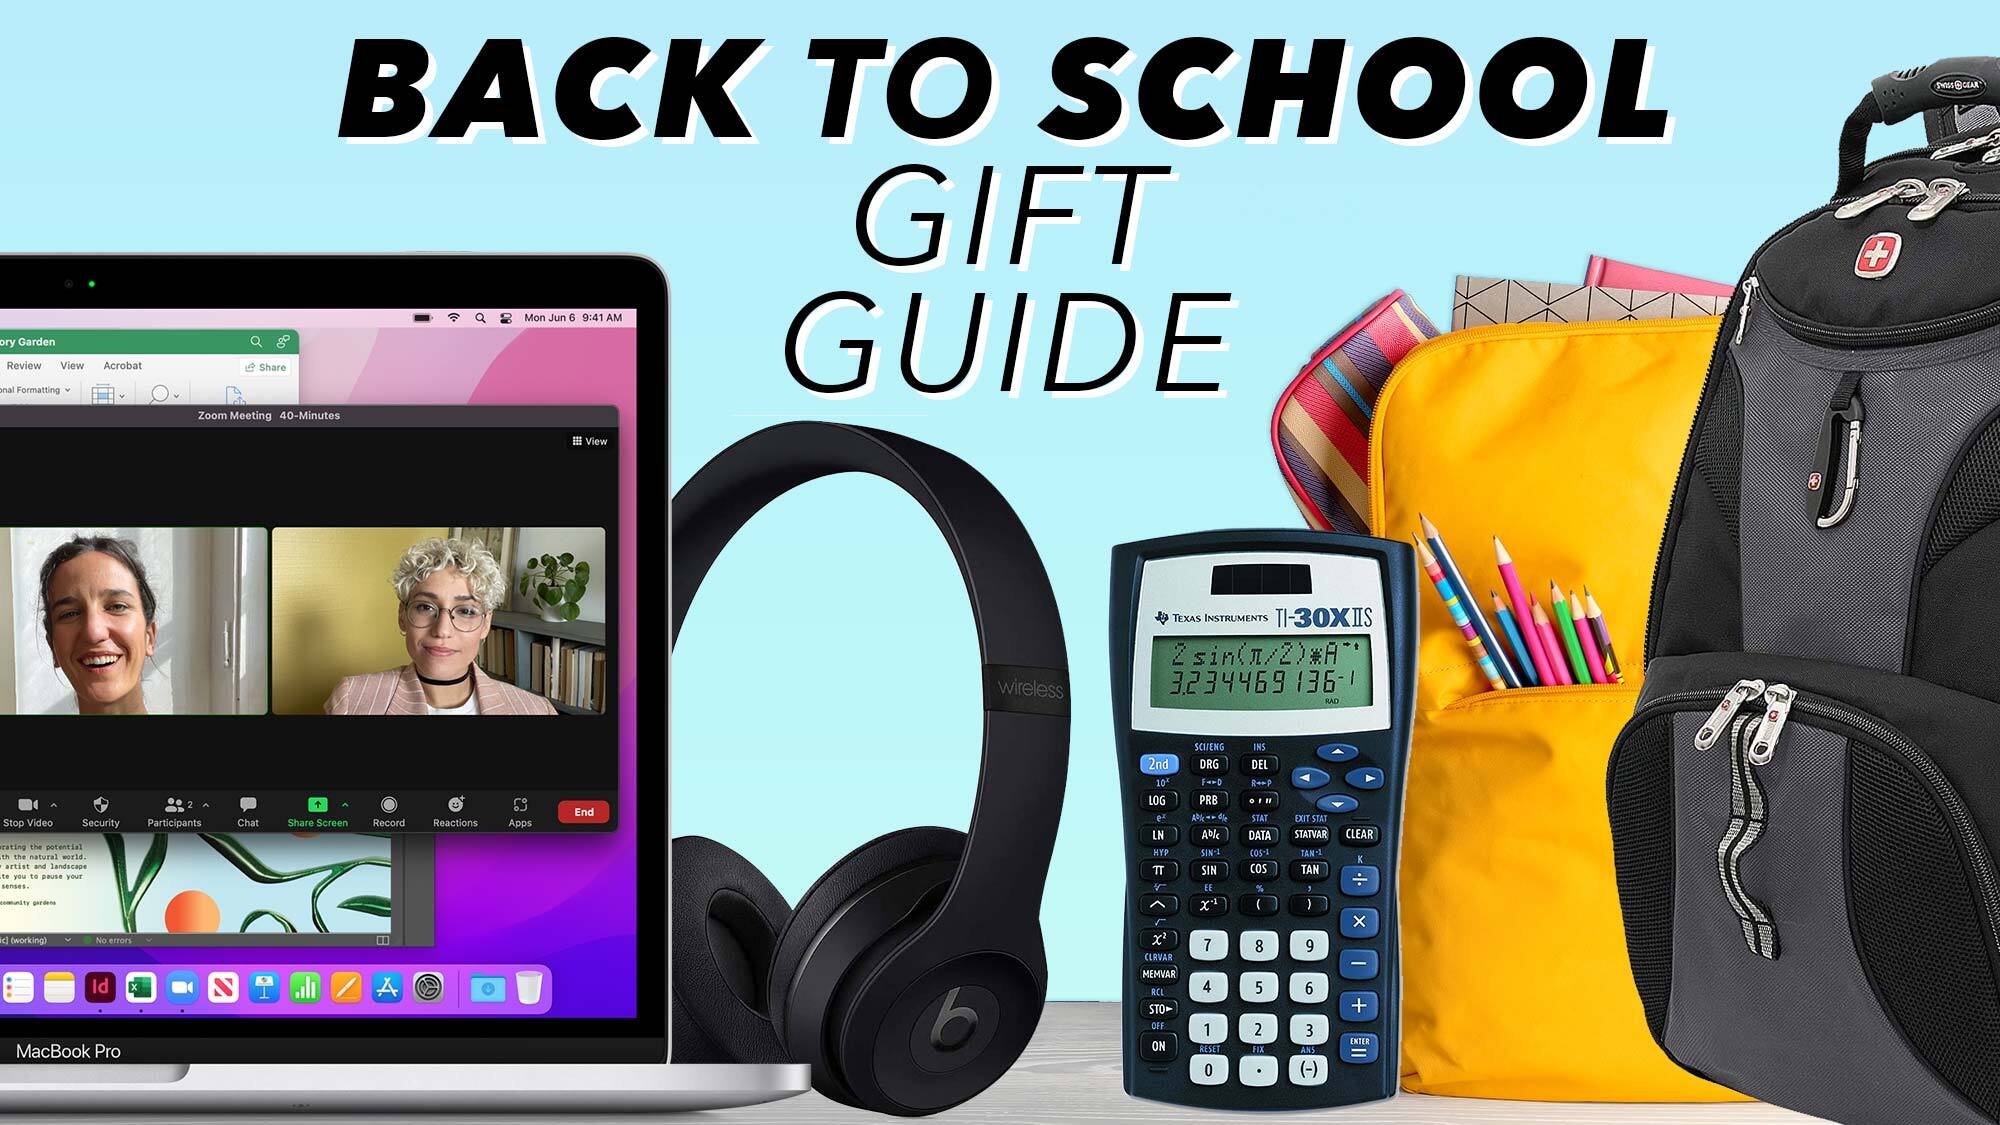 Back to school gift guide 2022 — great ideas for every budget